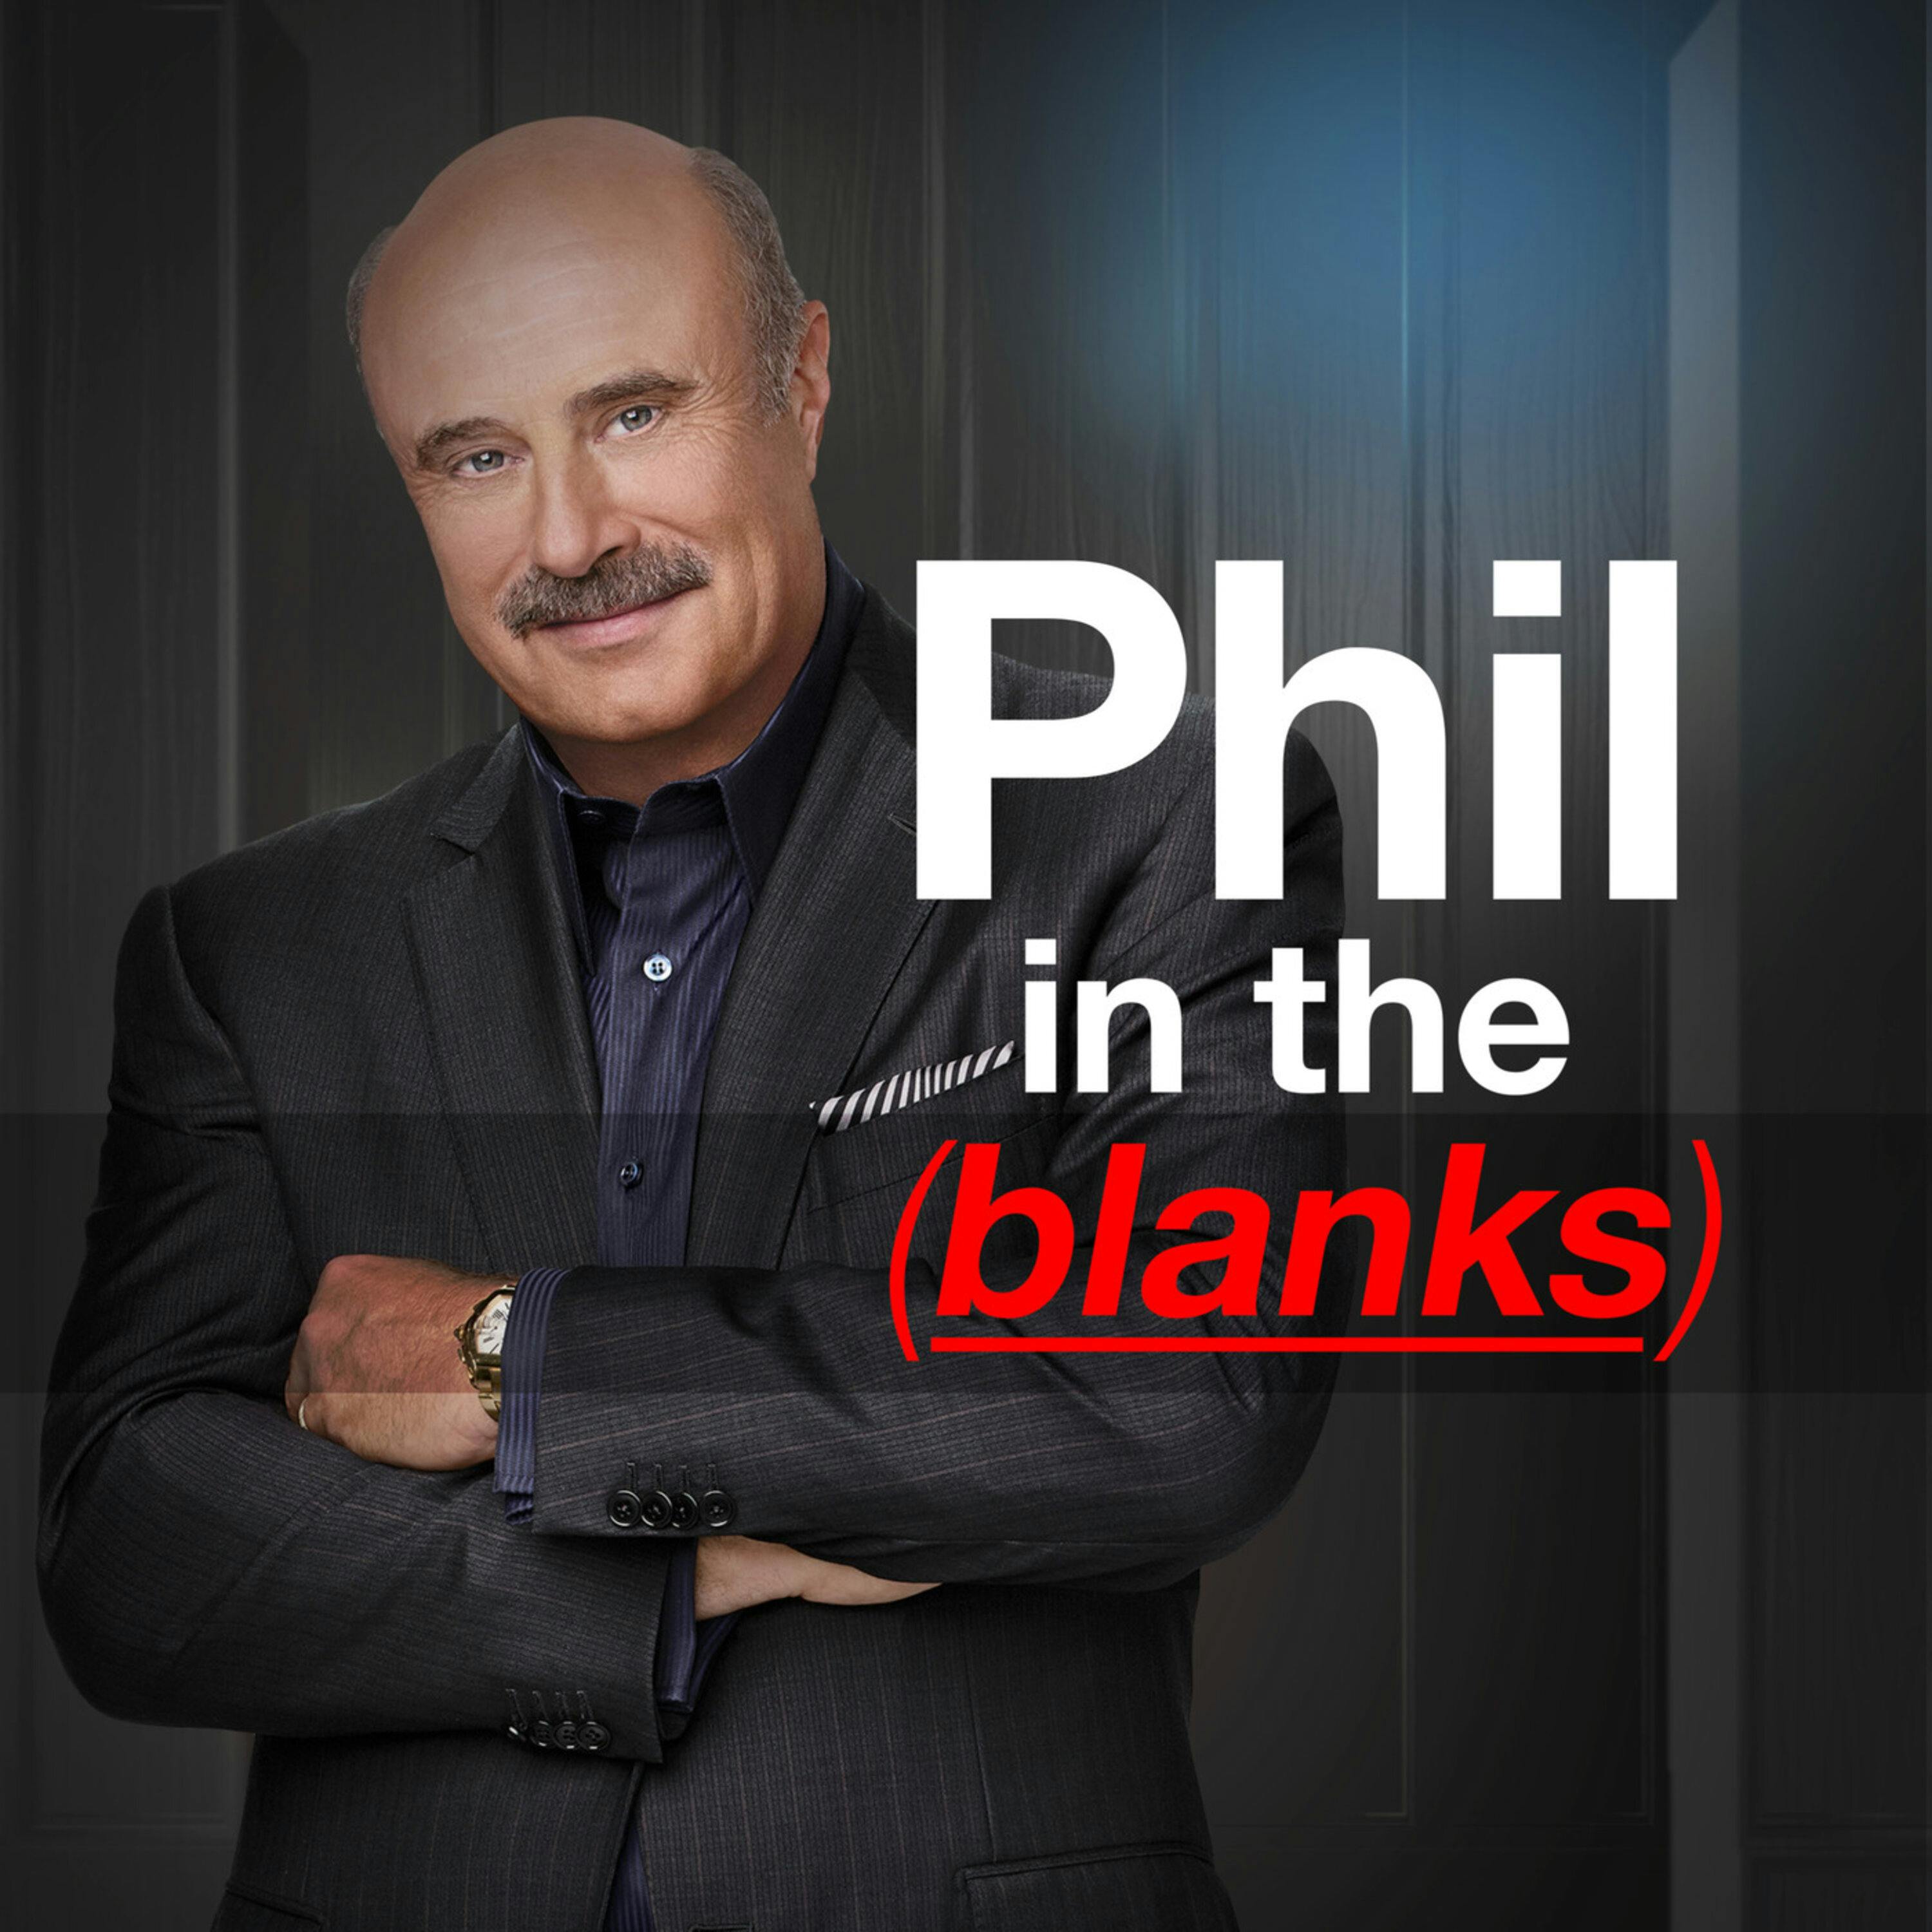 Dr. Phil Gets Real About Suicide, the Opioid Crisis and Cyber Bullying